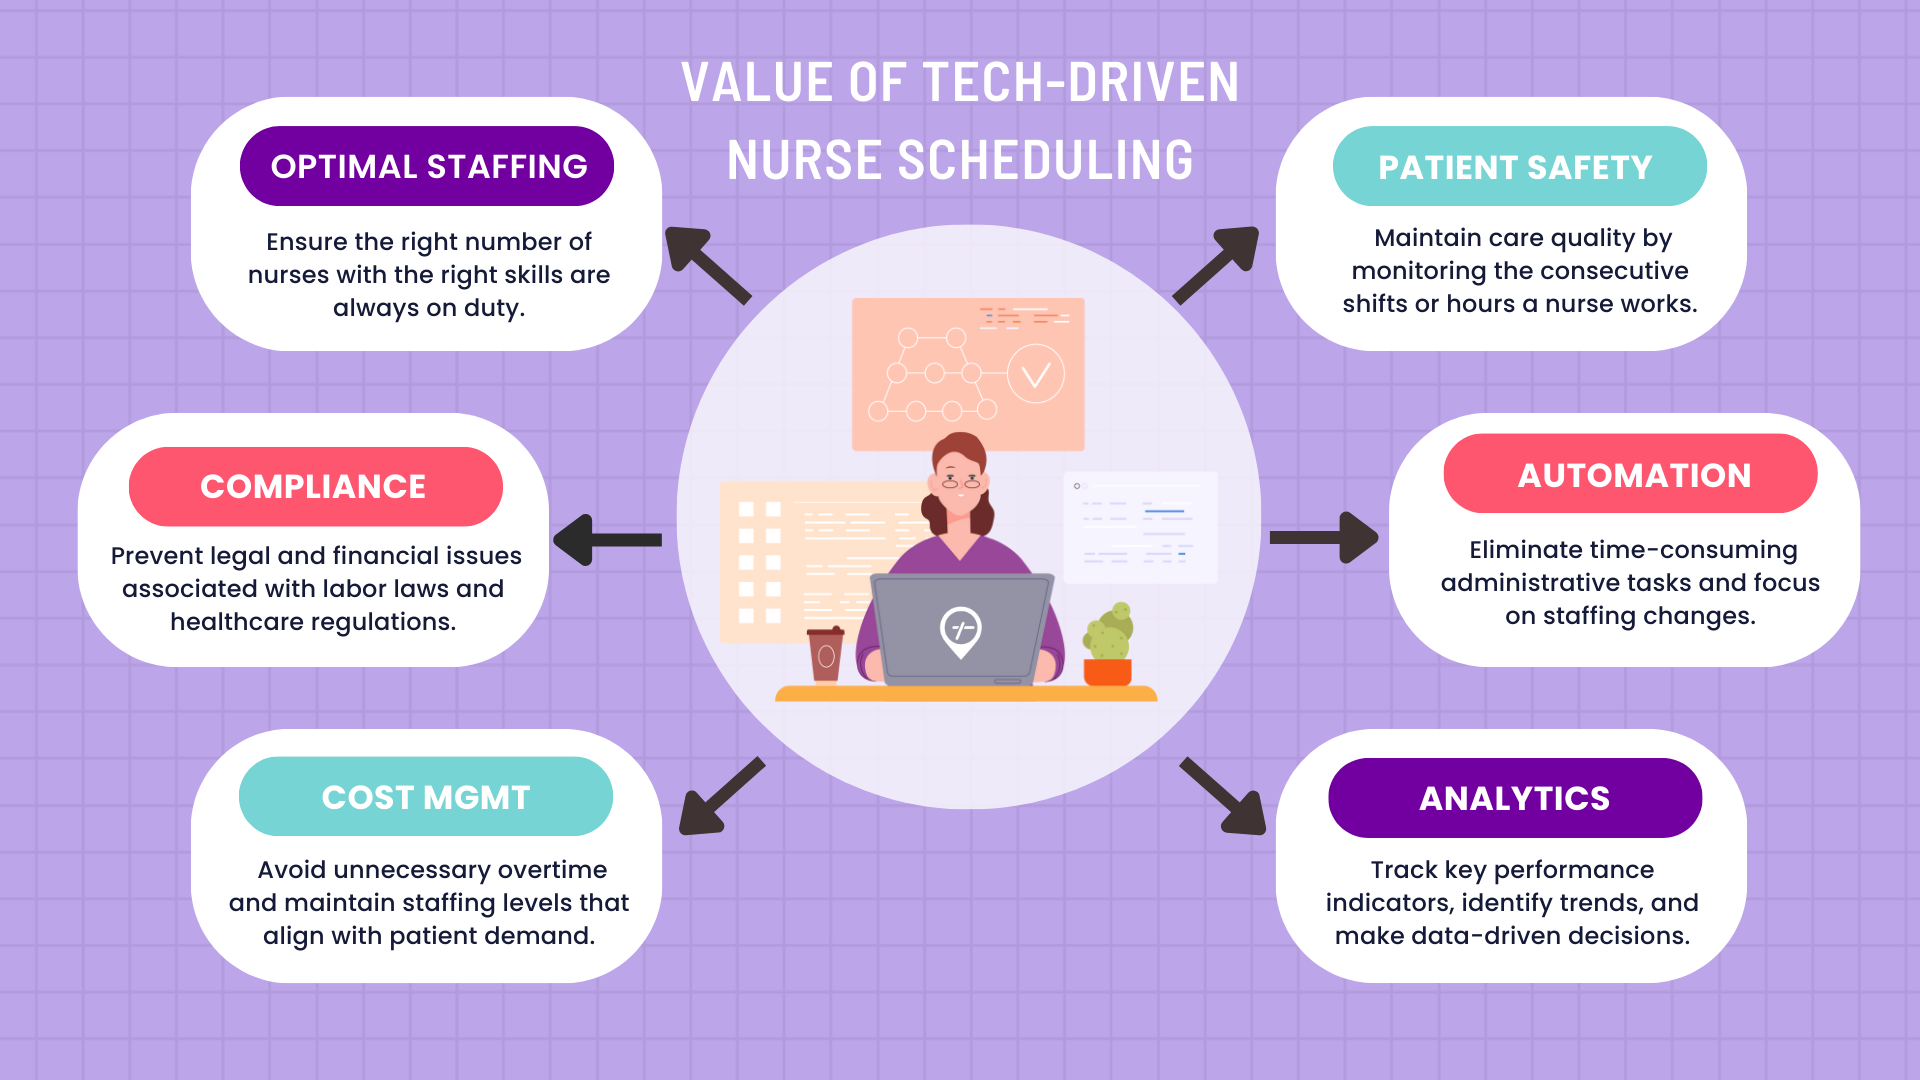 A mind map that illustrates the value of tech-driven nurse scheduling, including optimal staffing, compliance, cost management, patient safety, automation, and analytics.